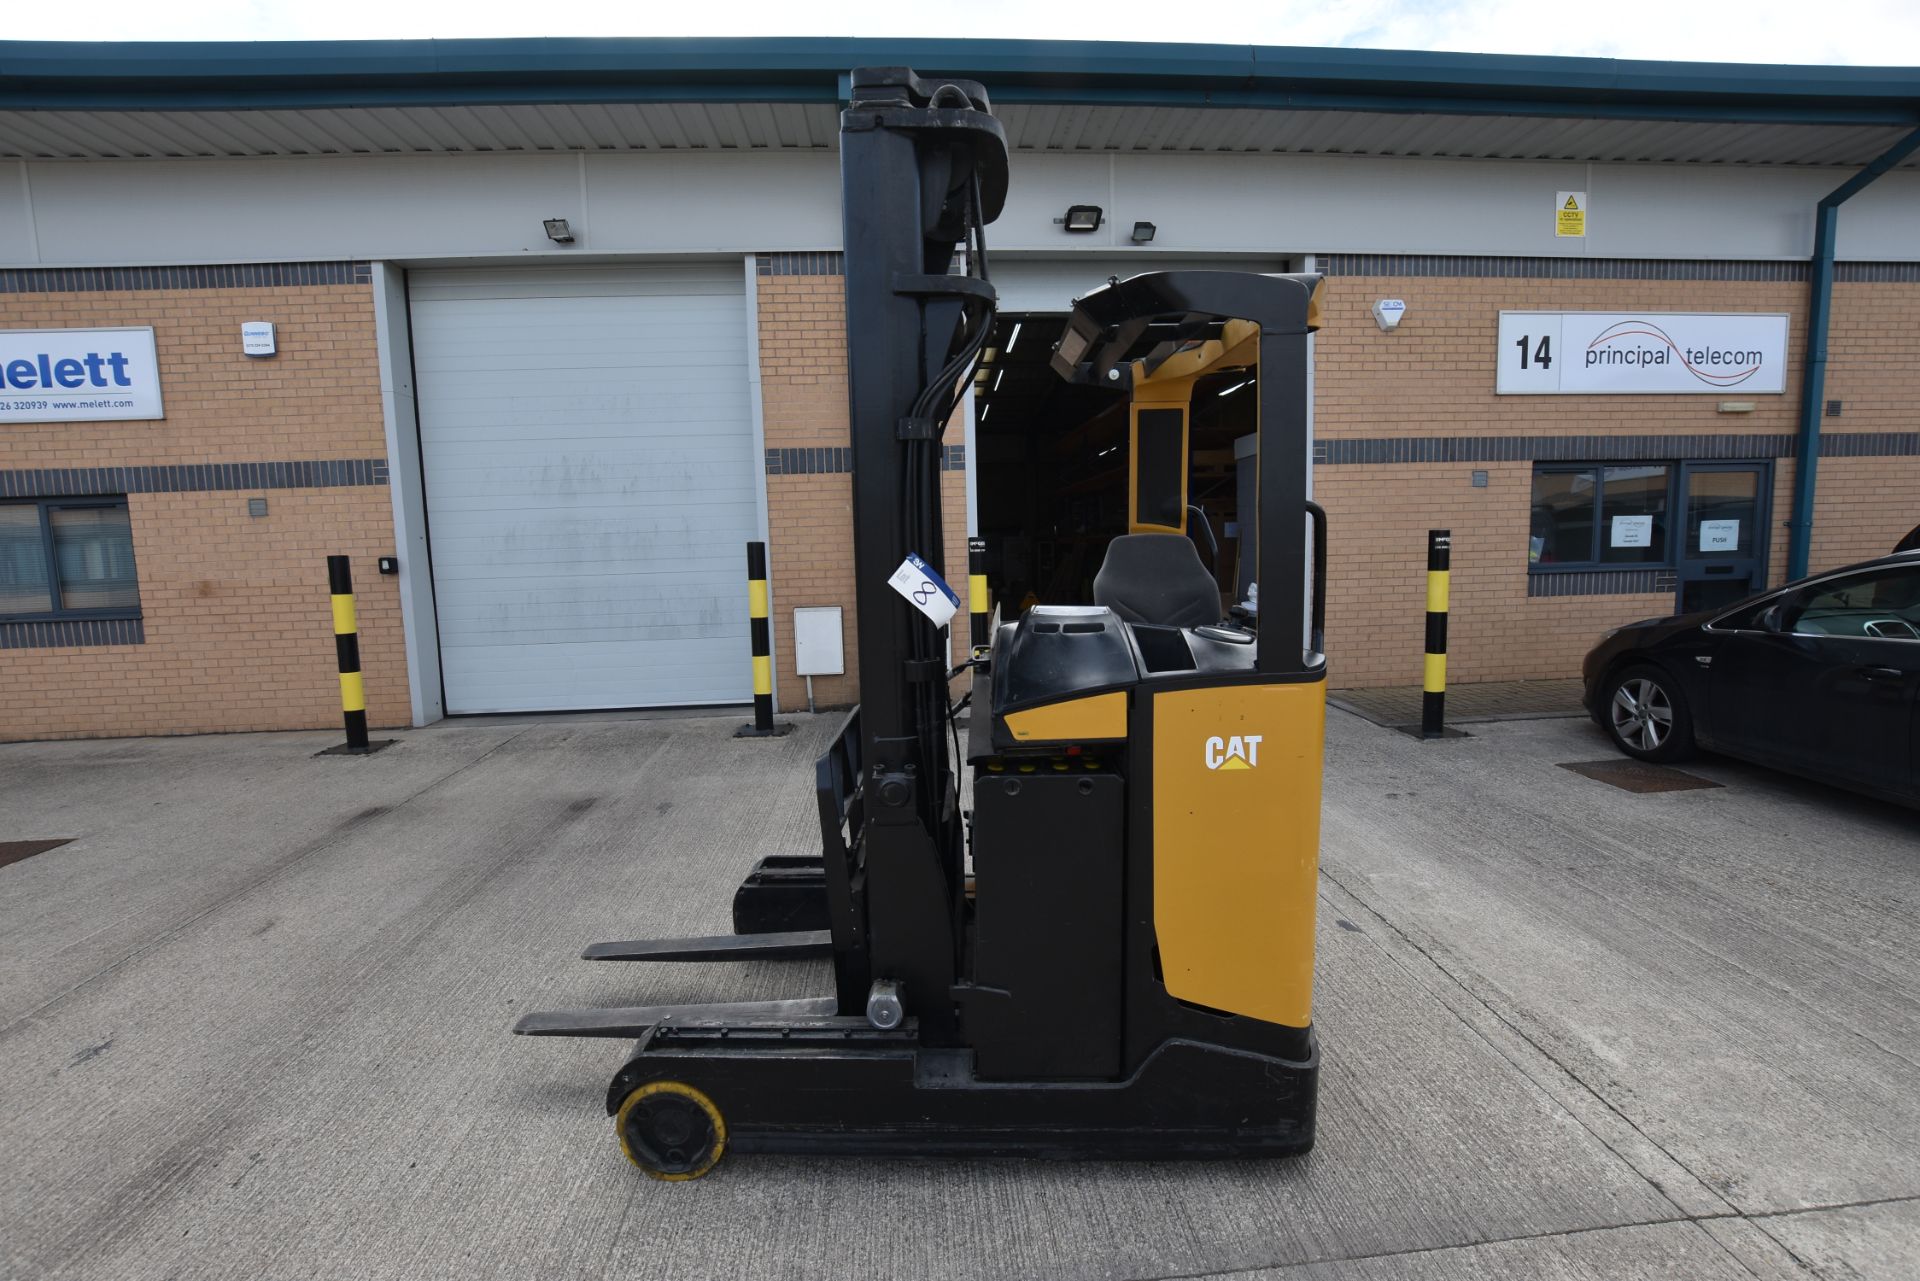 Caterpillar NR20NH 2000kg cap. Electric Reach Truck, serial no. 8NN800 41, year of manufacture 2007, - Image 2 of 6